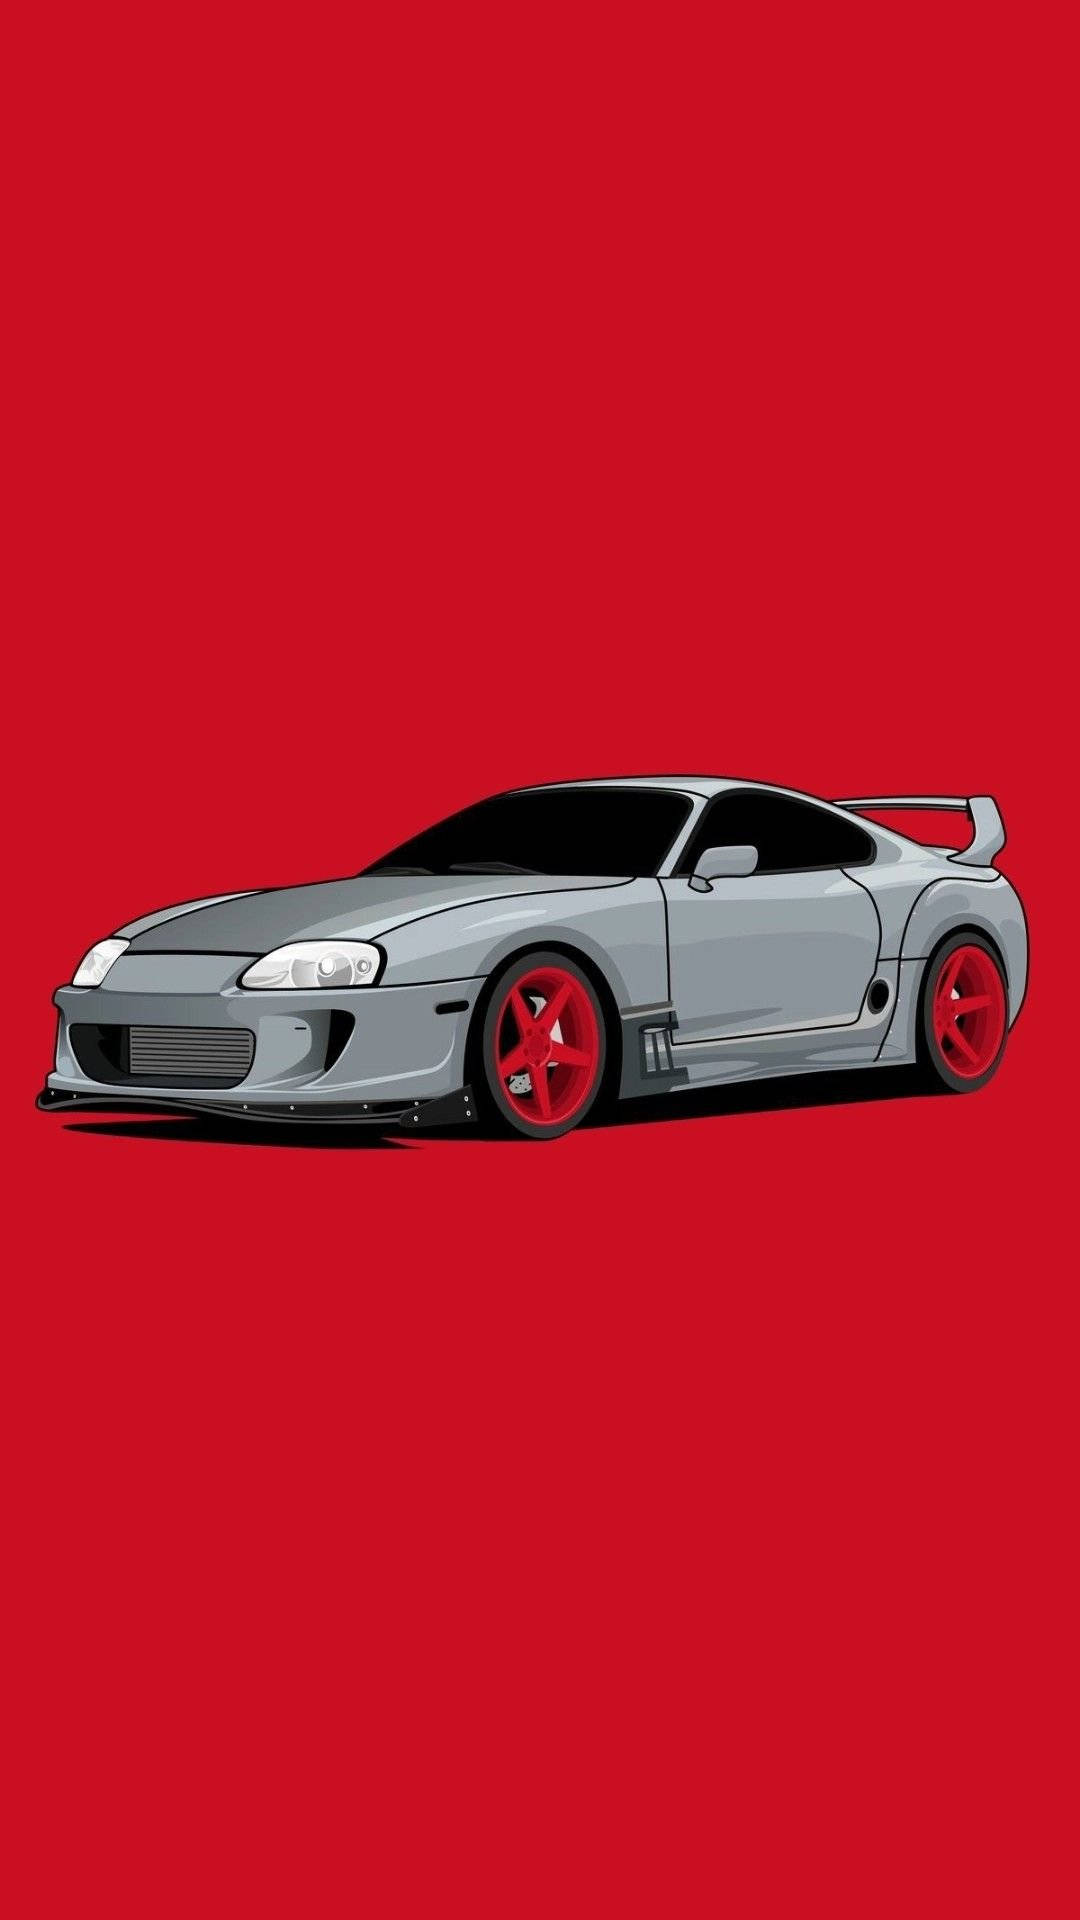 Jdm Car With Red Background Wallpaper